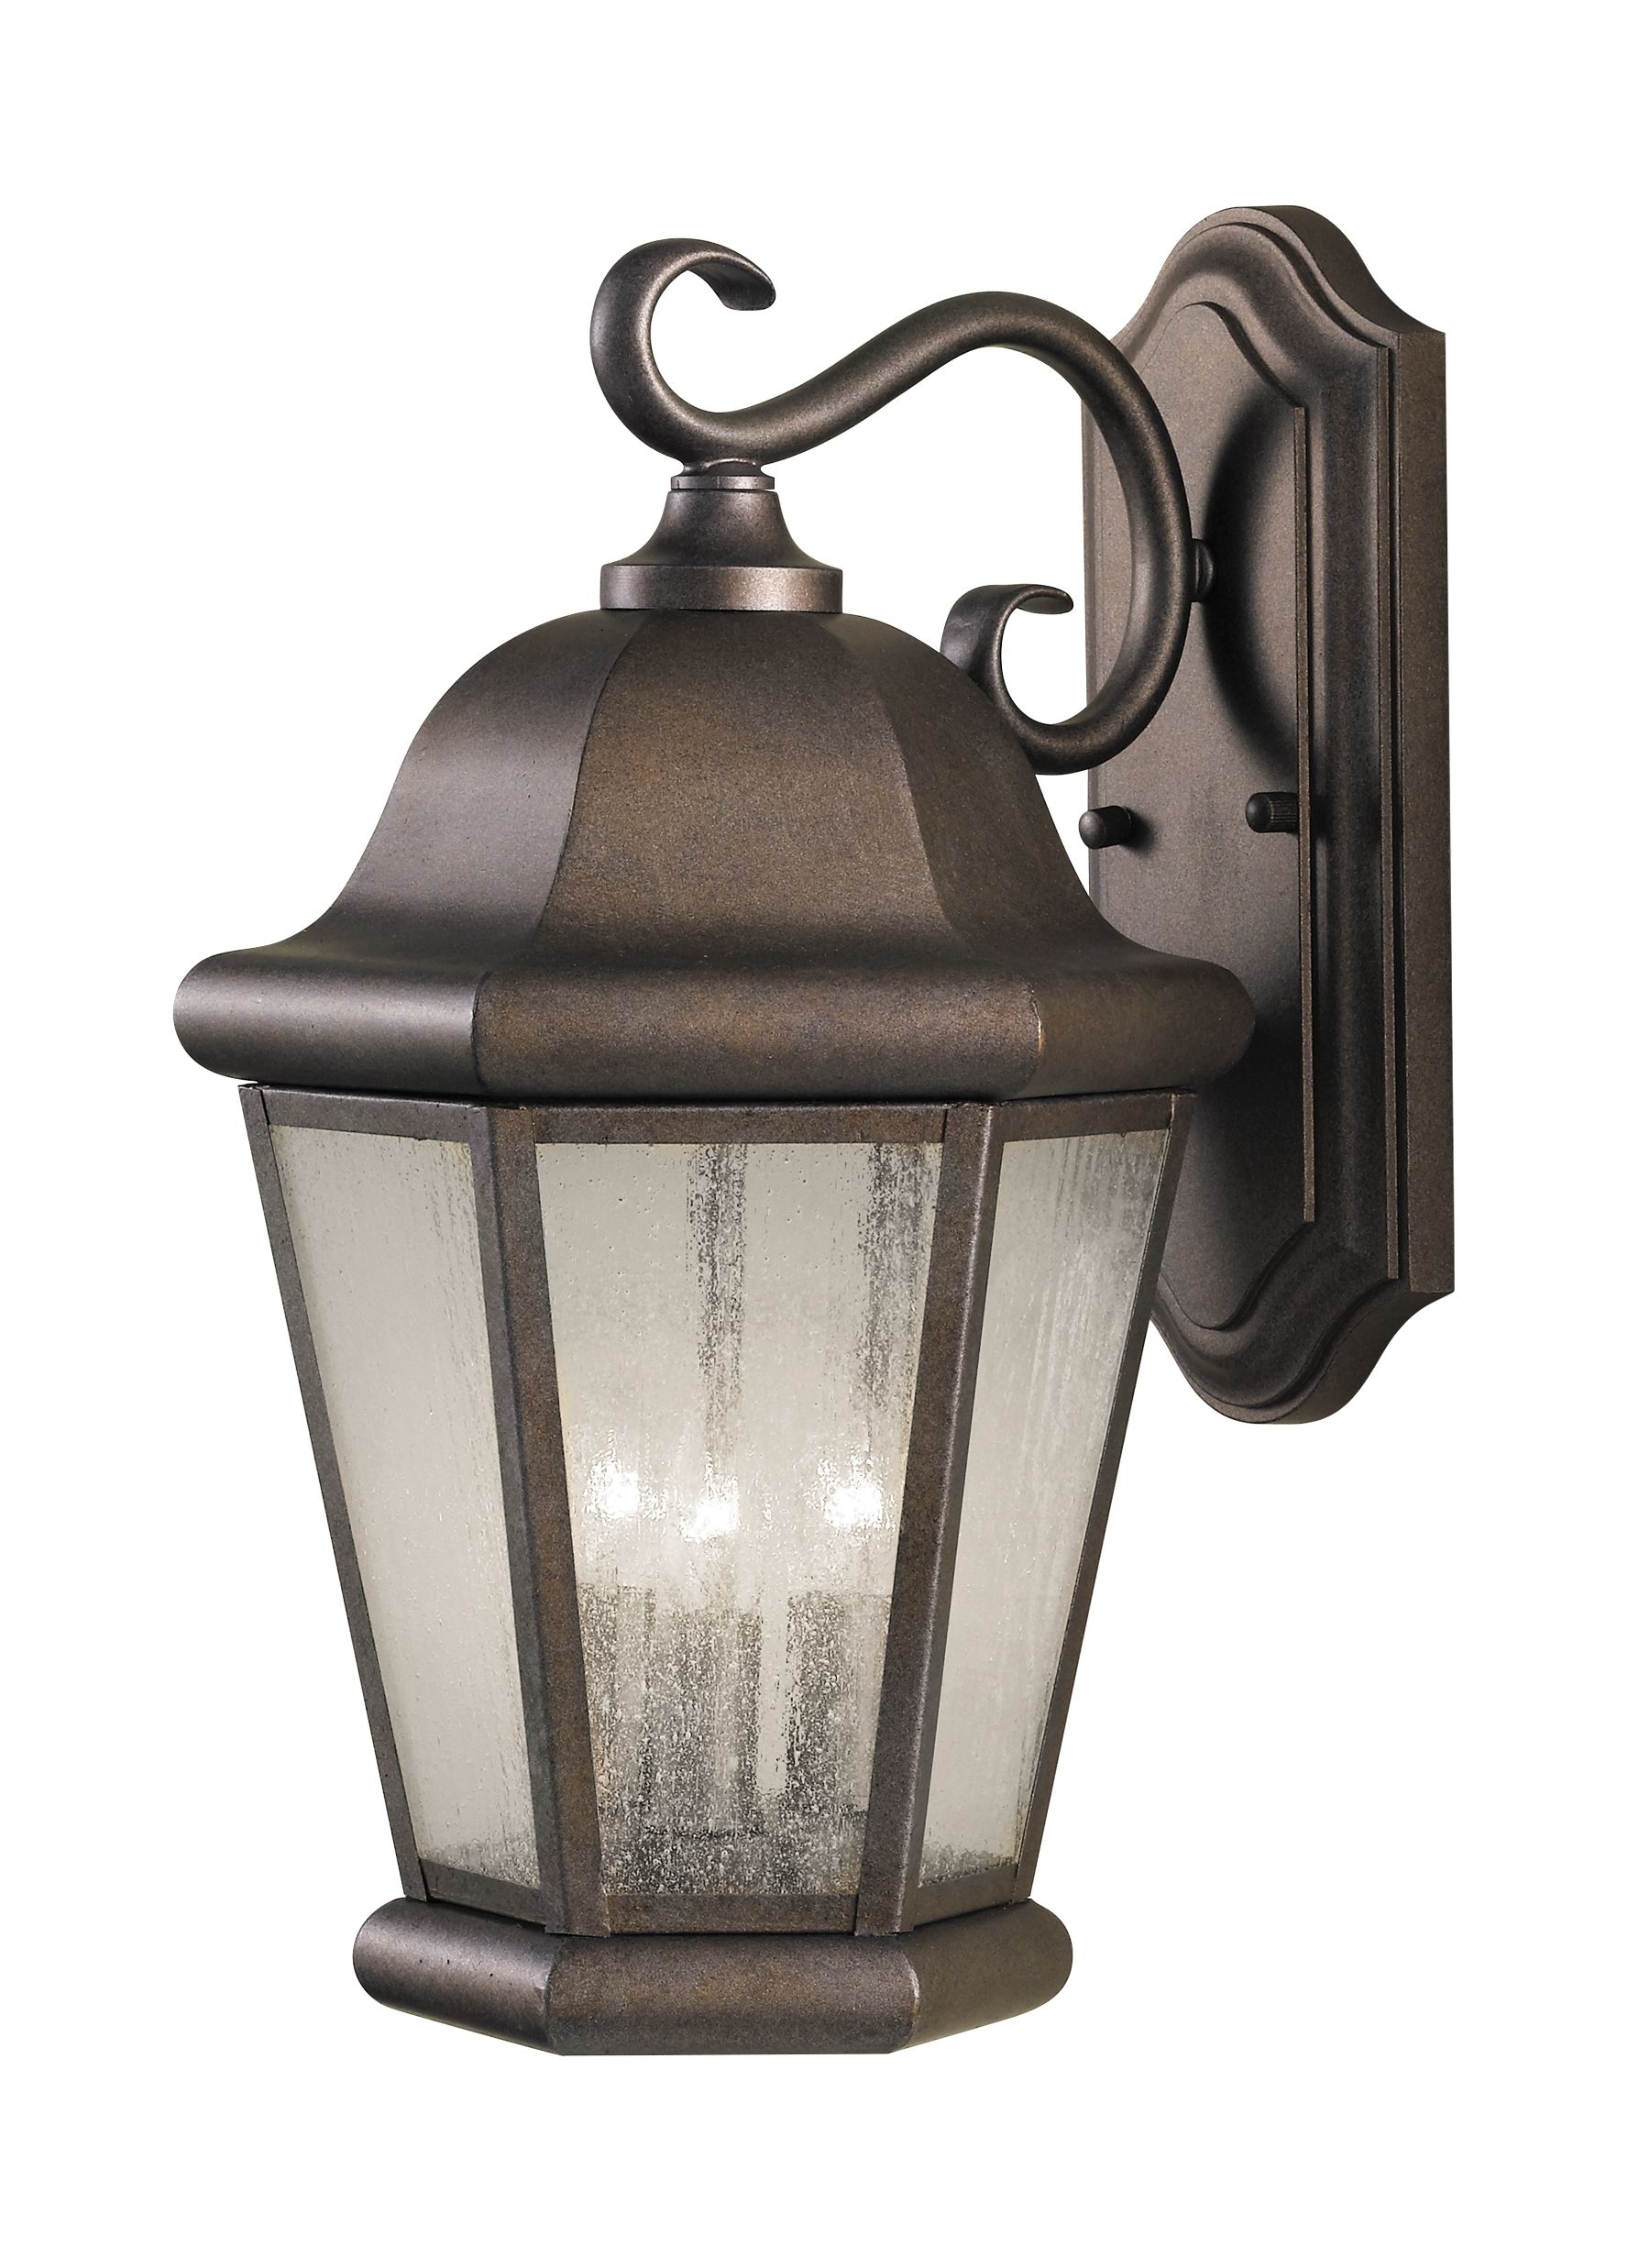 Ol5902cb,3 – Light Wall Lantern,corinthian Bronze Intended For Outdoor Wall Lighting At Houzz (View 2 of 15)